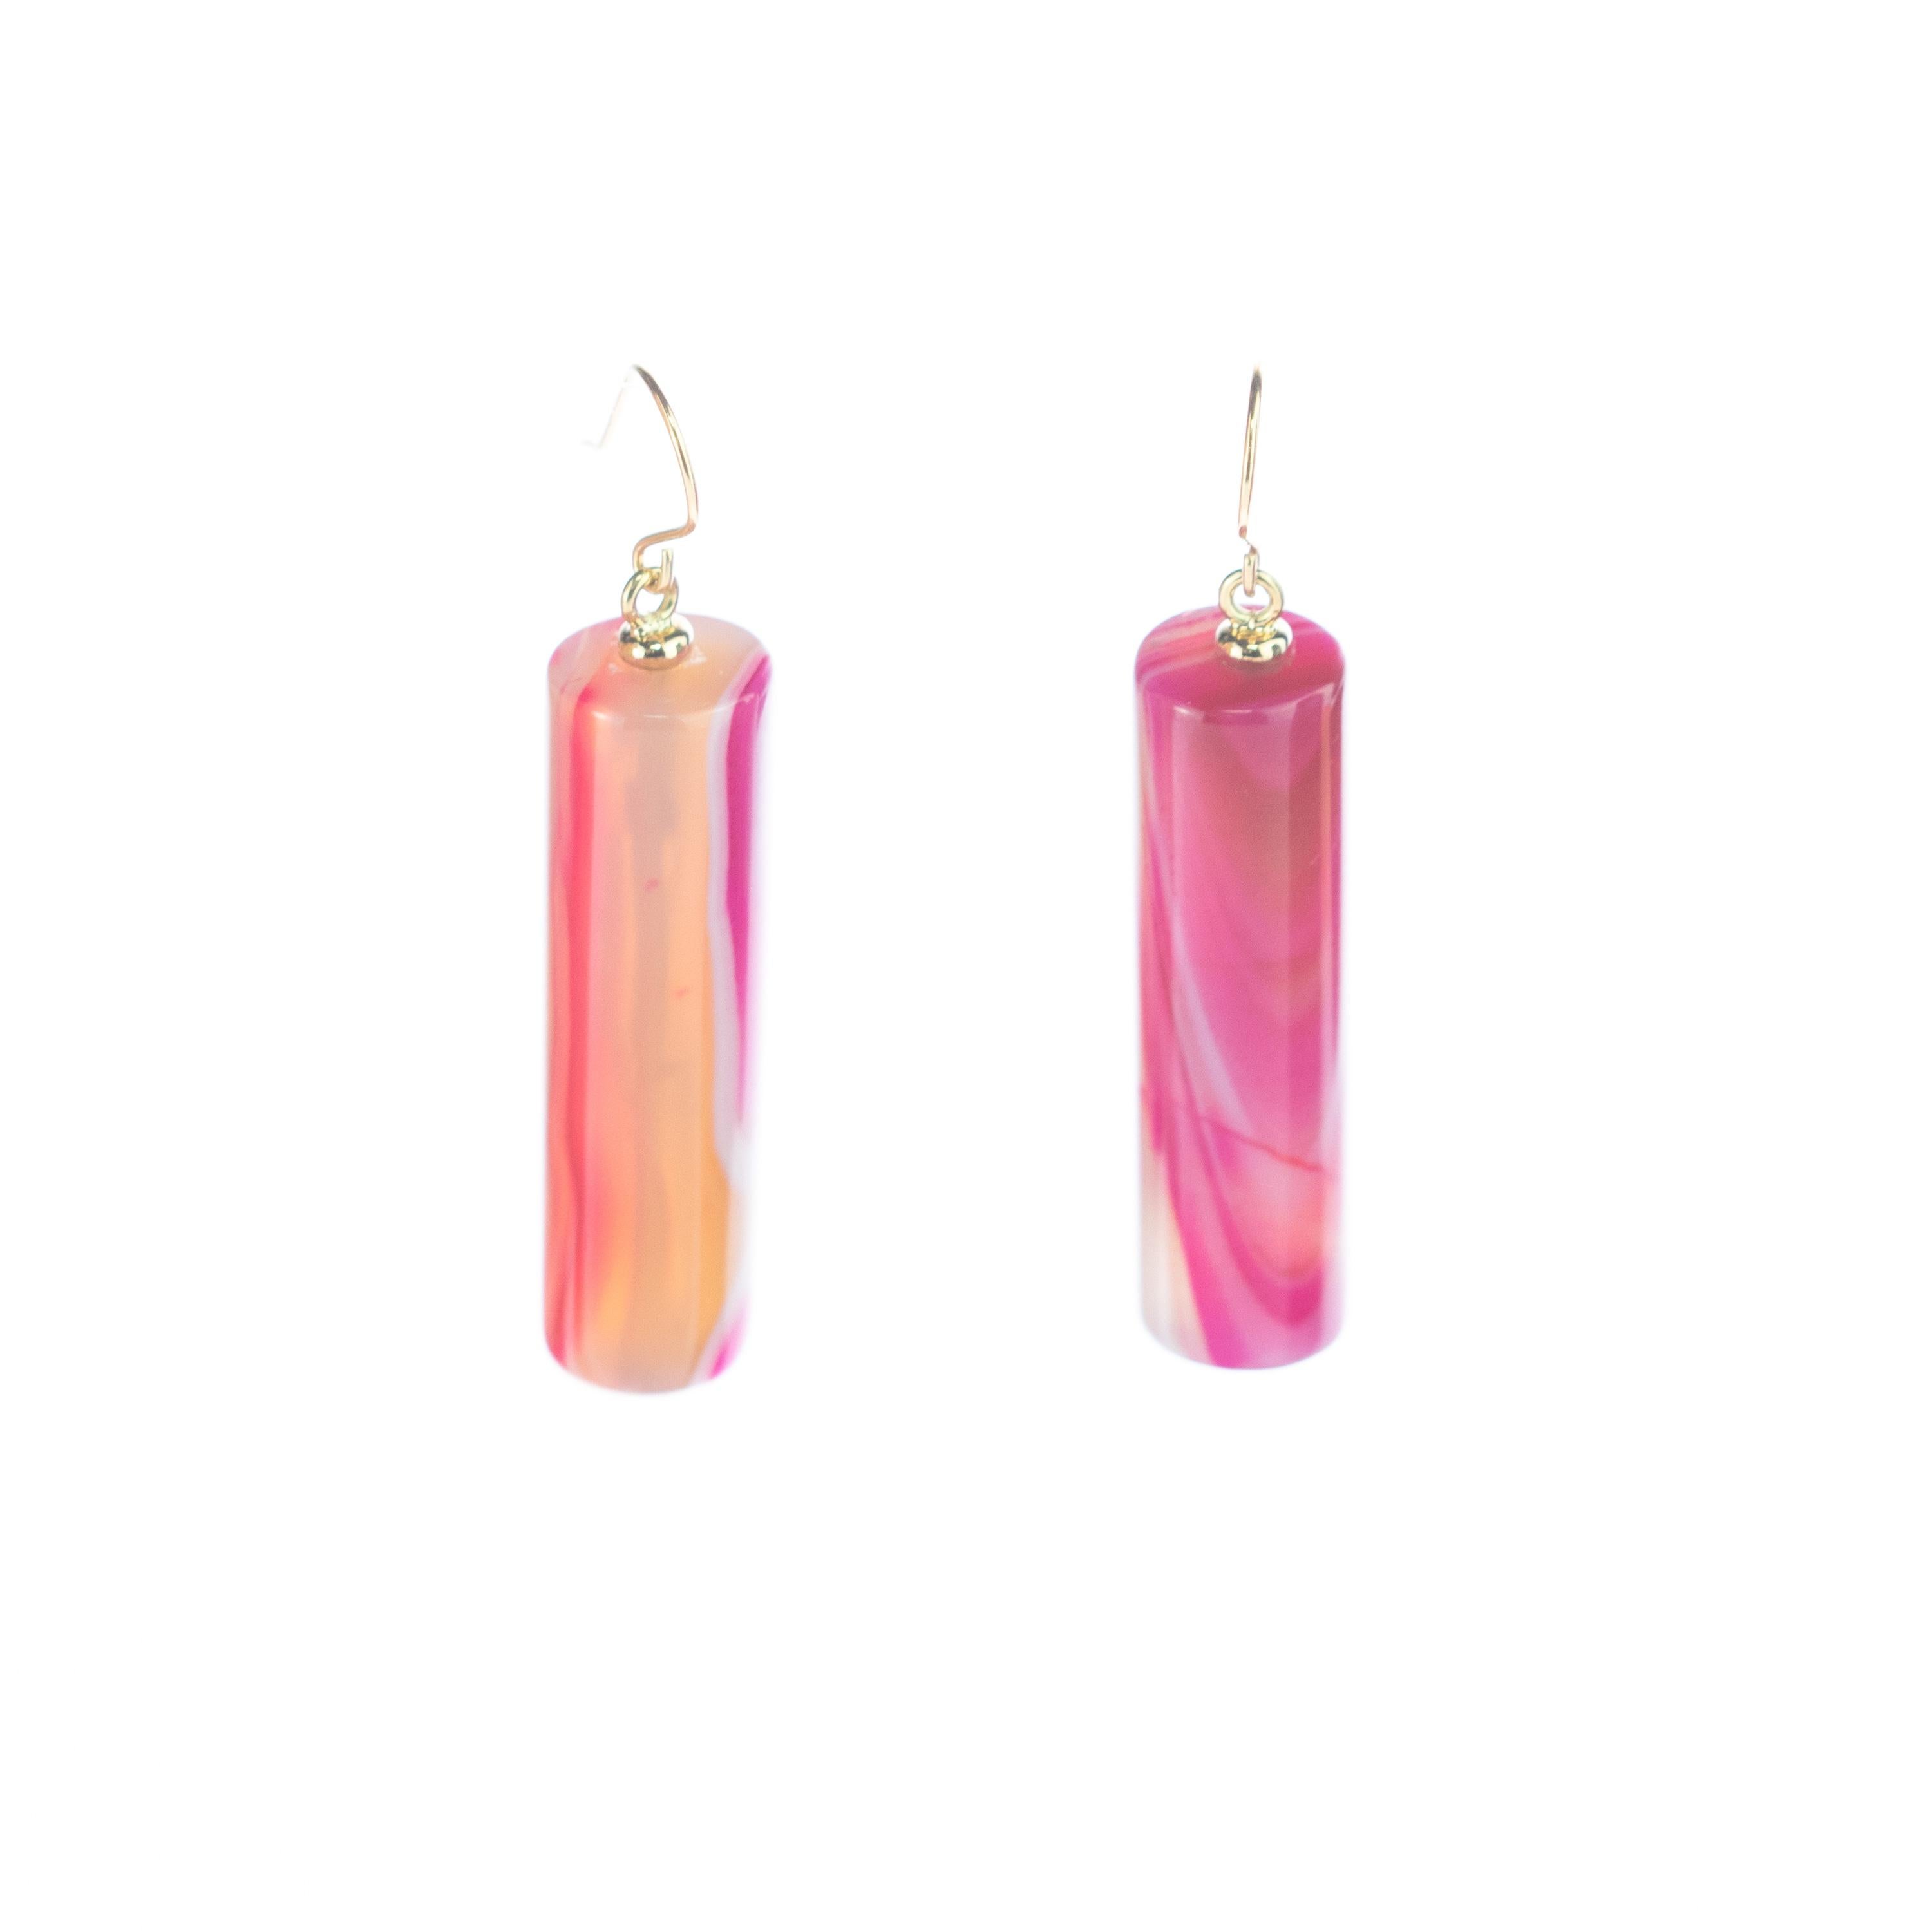 This stunning masterpiece with high quality craftsmanship was born in the Intini Jewels workshop. Our designers add all the italian modern style and glamour in one exquisite piece. Stunning Agate dangle tubes hanging from 18 karat yellow gold.

Pink